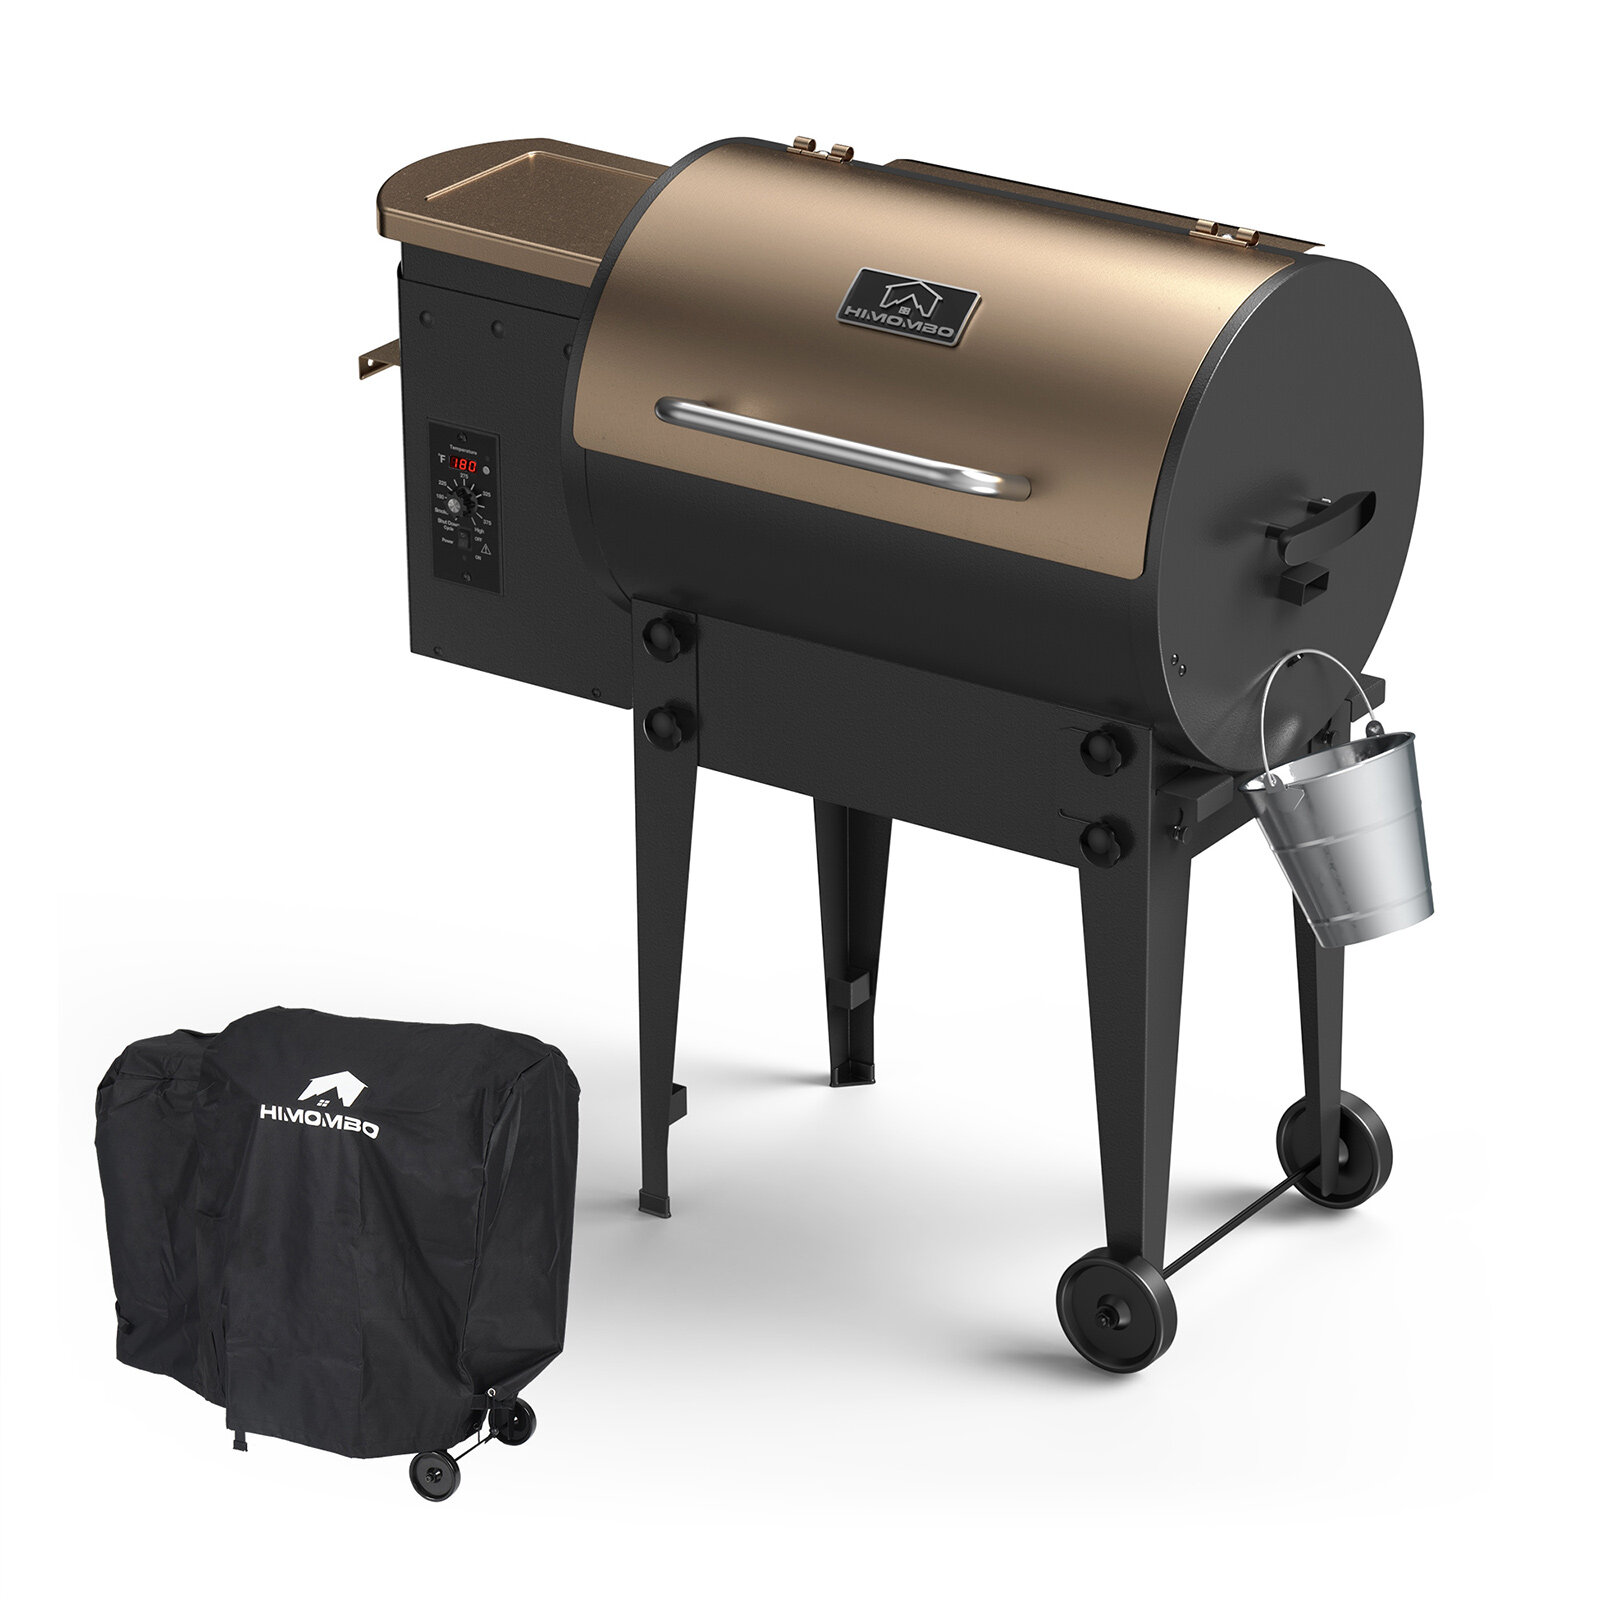 HiMombo 8 in 1 BBQ Gril Wood Pellet Grill and Smoker with Extendable Equipped Foldable Table Legs & Cover Auto Temperature Control for outdoor BBQ Smoke